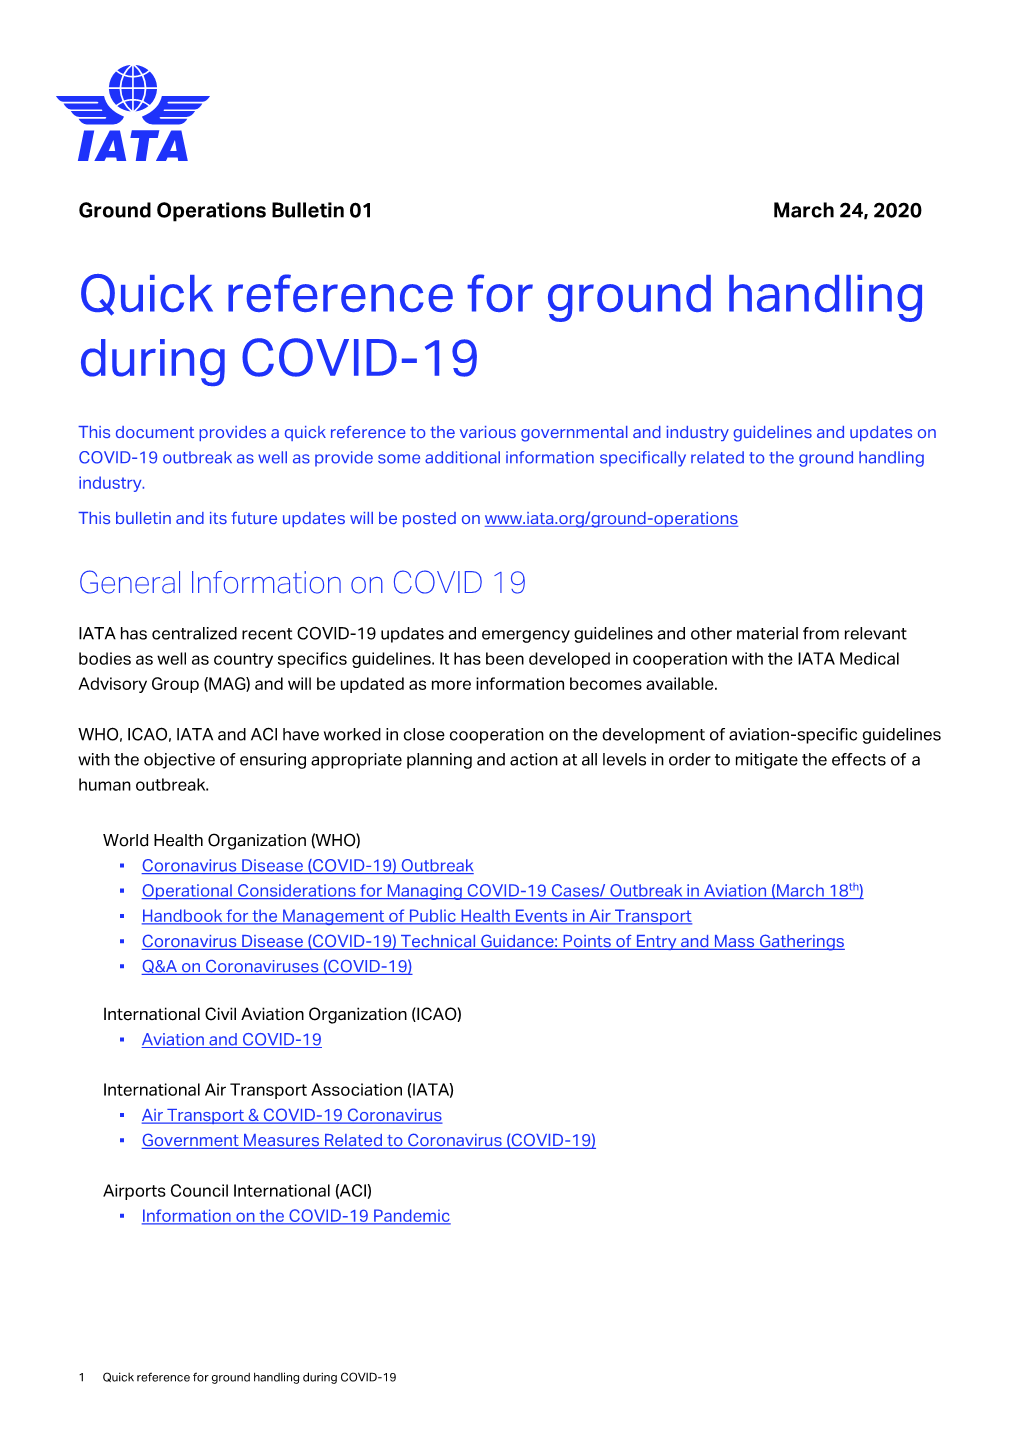 IATA Quick Reference for Ground Handling During COVID-19